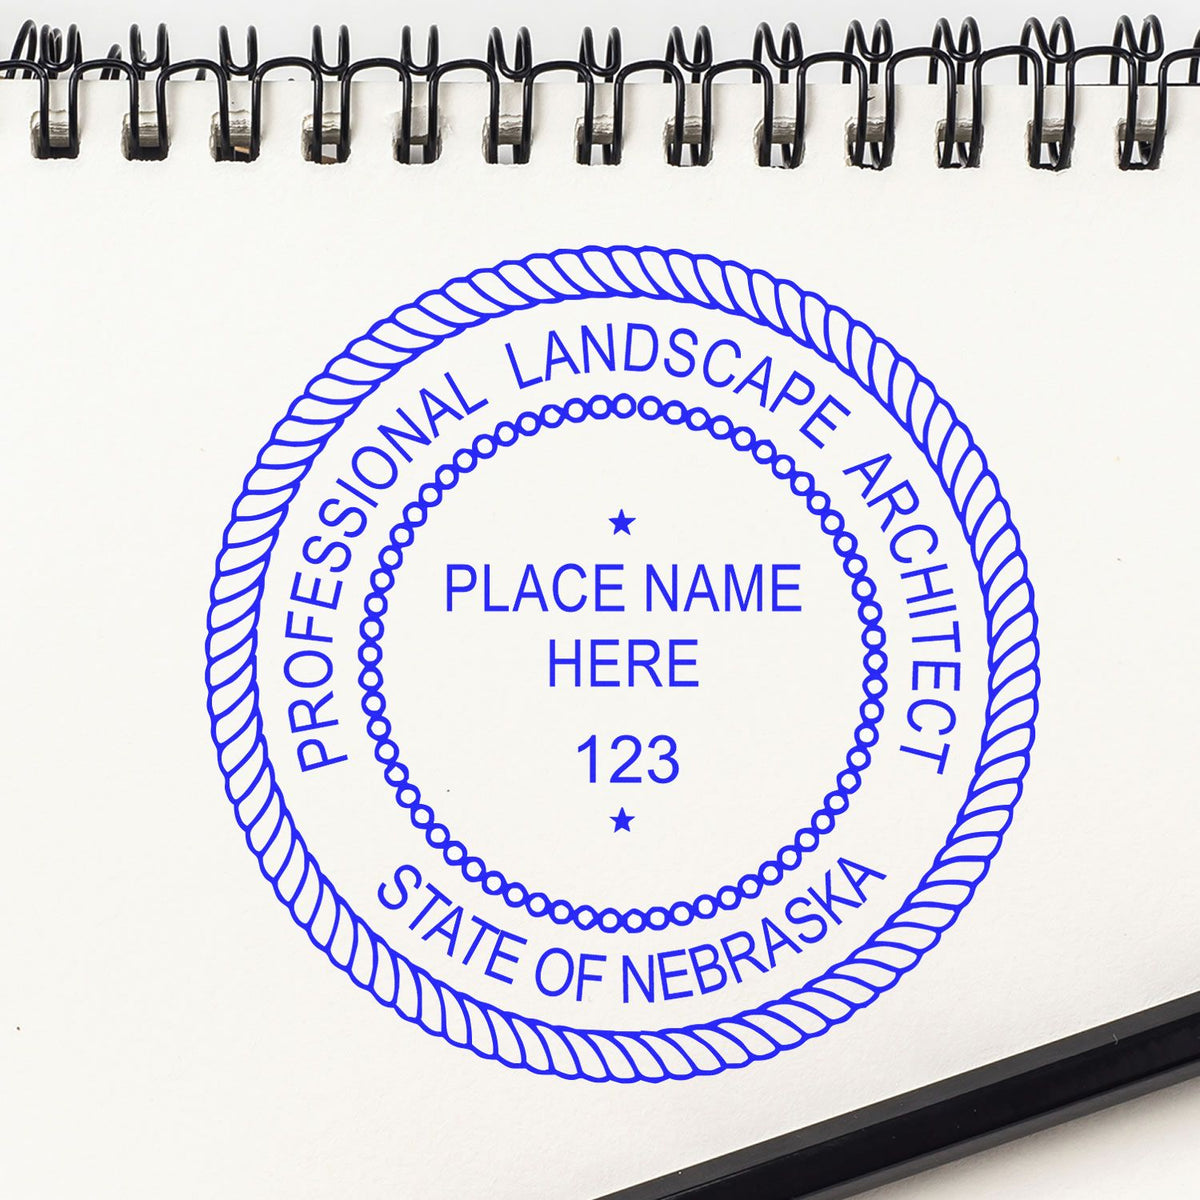 The Slim Pre-Inked Nebraska Landscape Architect Seal Stamp stamp impression comes to life with a crisp, detailed photo on paper - showcasing true professional quality.